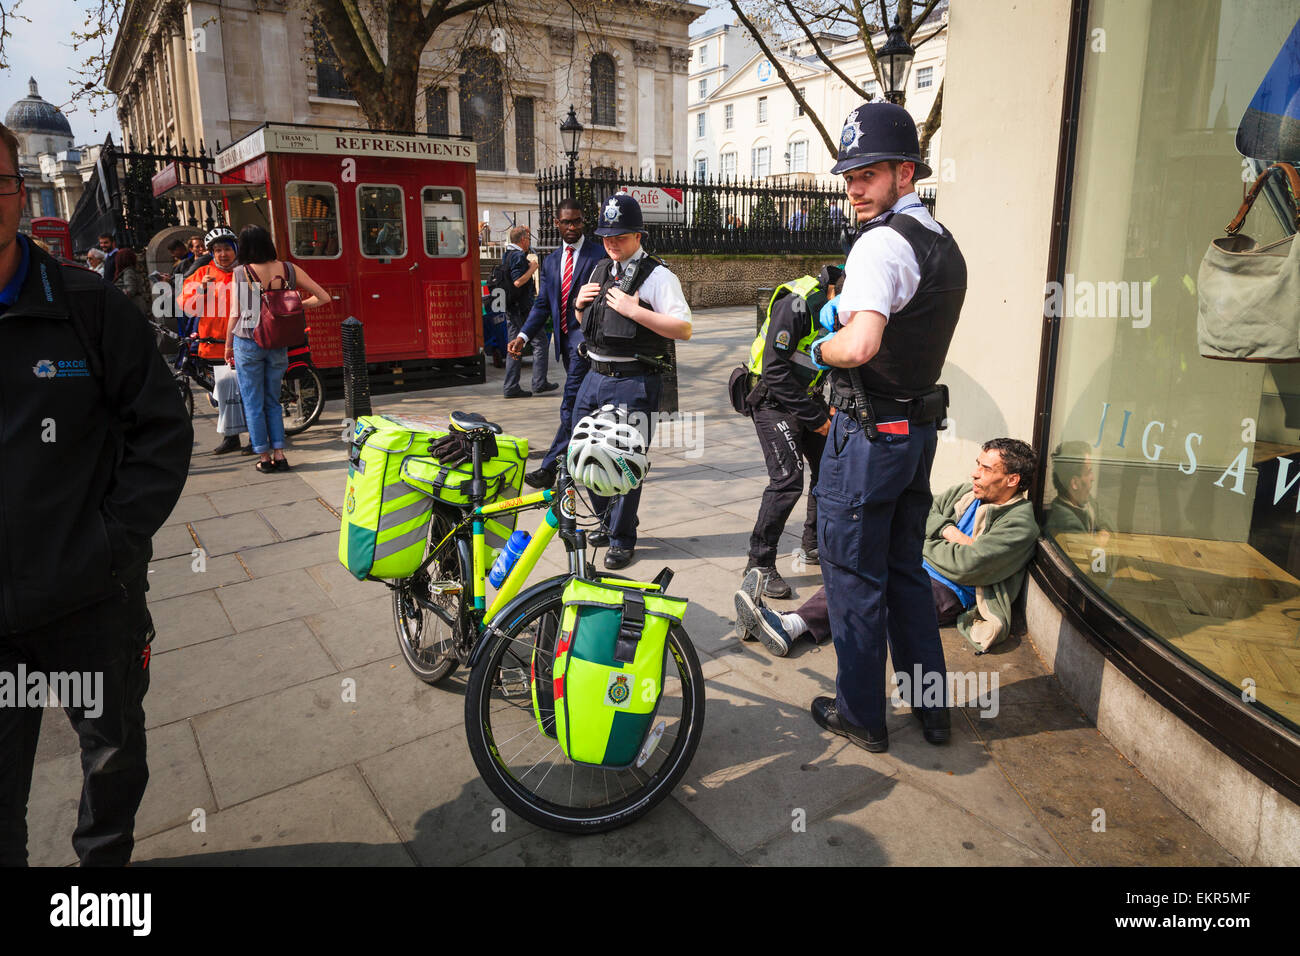 Two london policemen help a London Ambulance Cycle Responder attend to a man Stock Photo